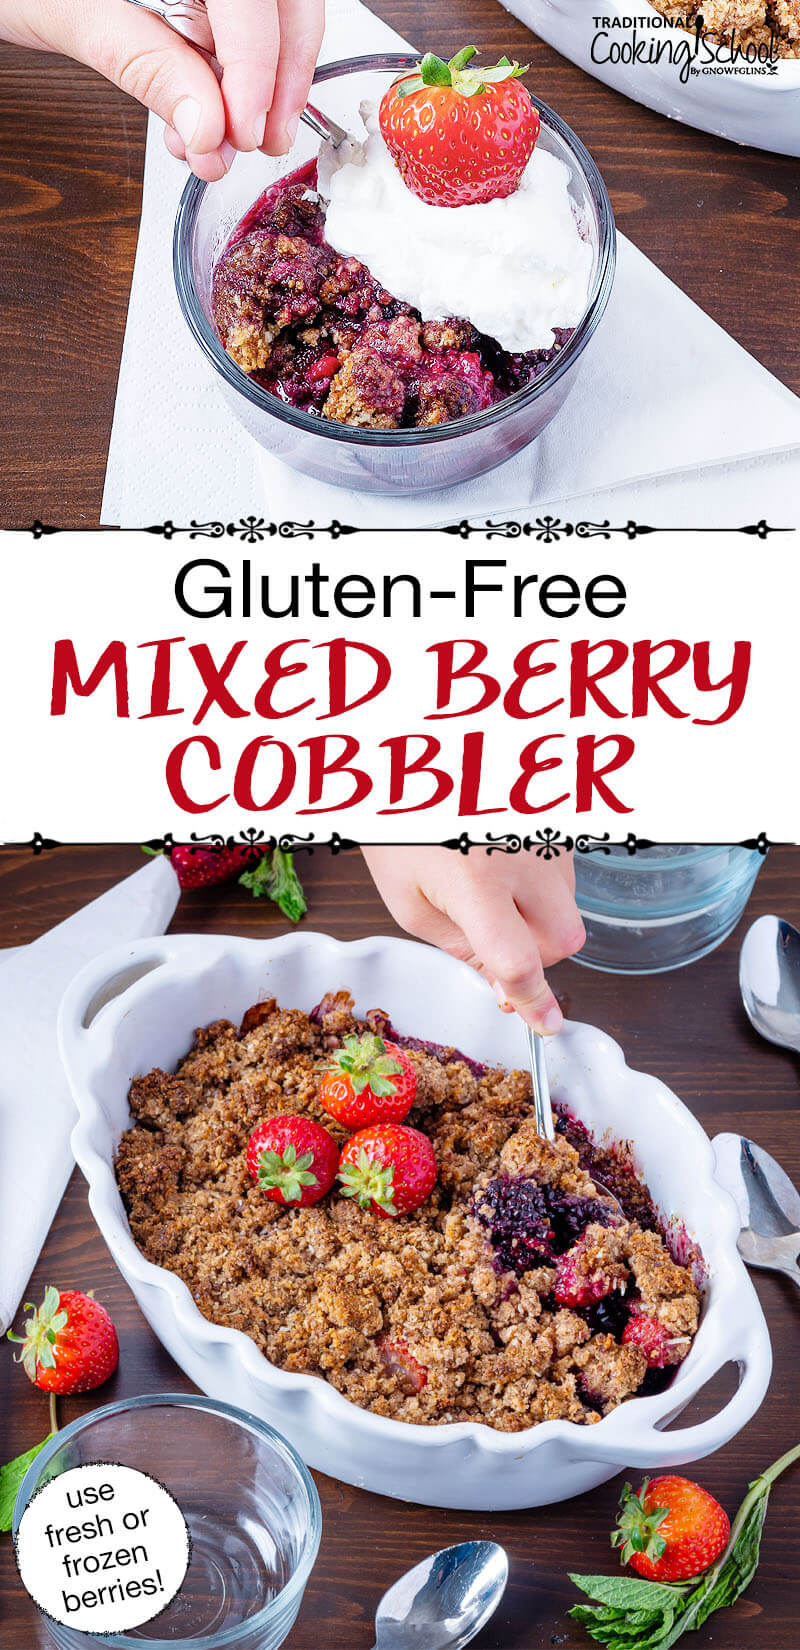 Photo collage of a cobbler garnished with fresh strawberries in a pretty white ceramic dish with scalloped edges, and a small bowl of cobbler topped with whipped cream. Text overlay says: "Gluten-Free Mixed Berry Cobbler (use fresh or frozen berries!)"